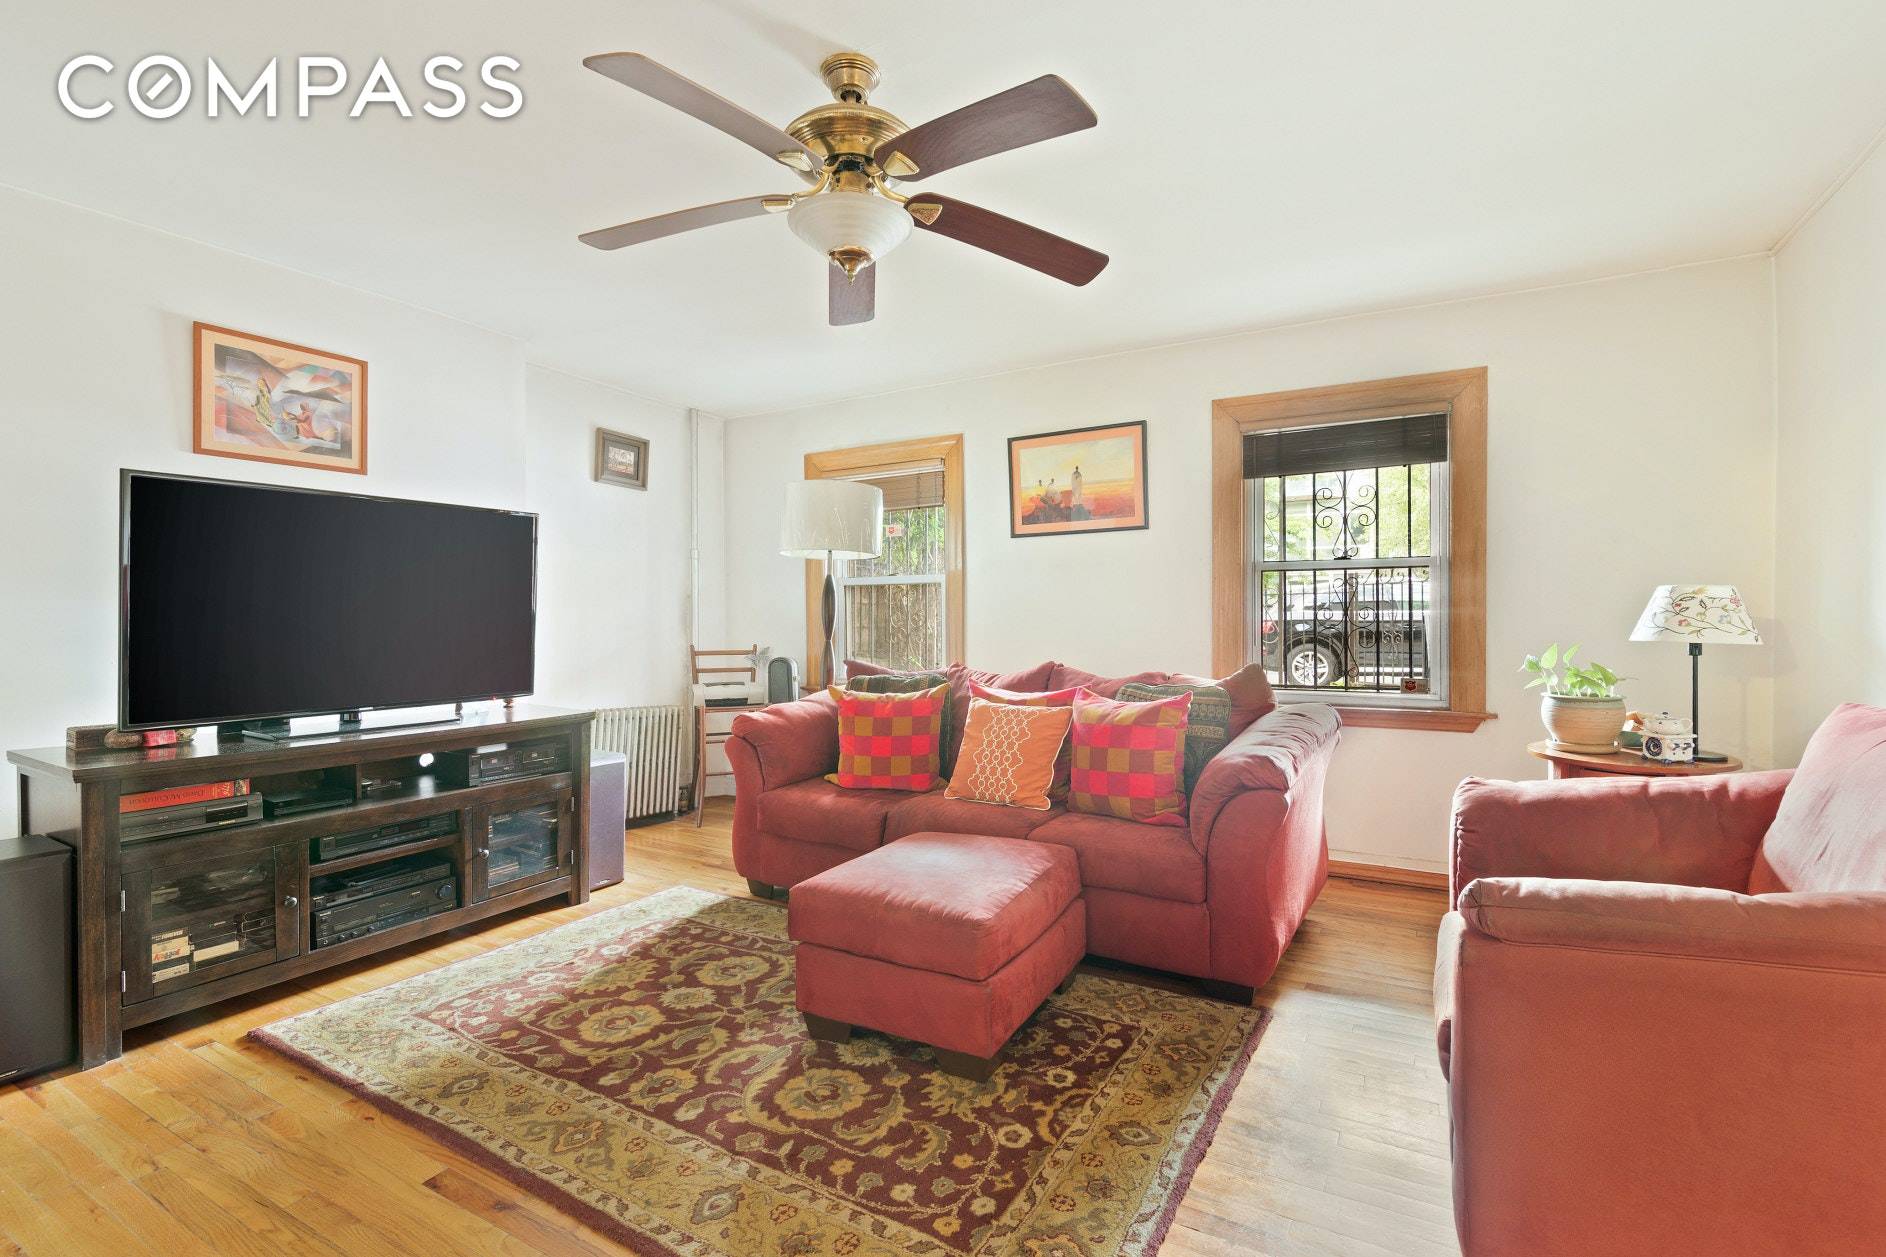 Relax in your private outdoor space in this 25 ft wide two Family home in historic Clinton Hill.